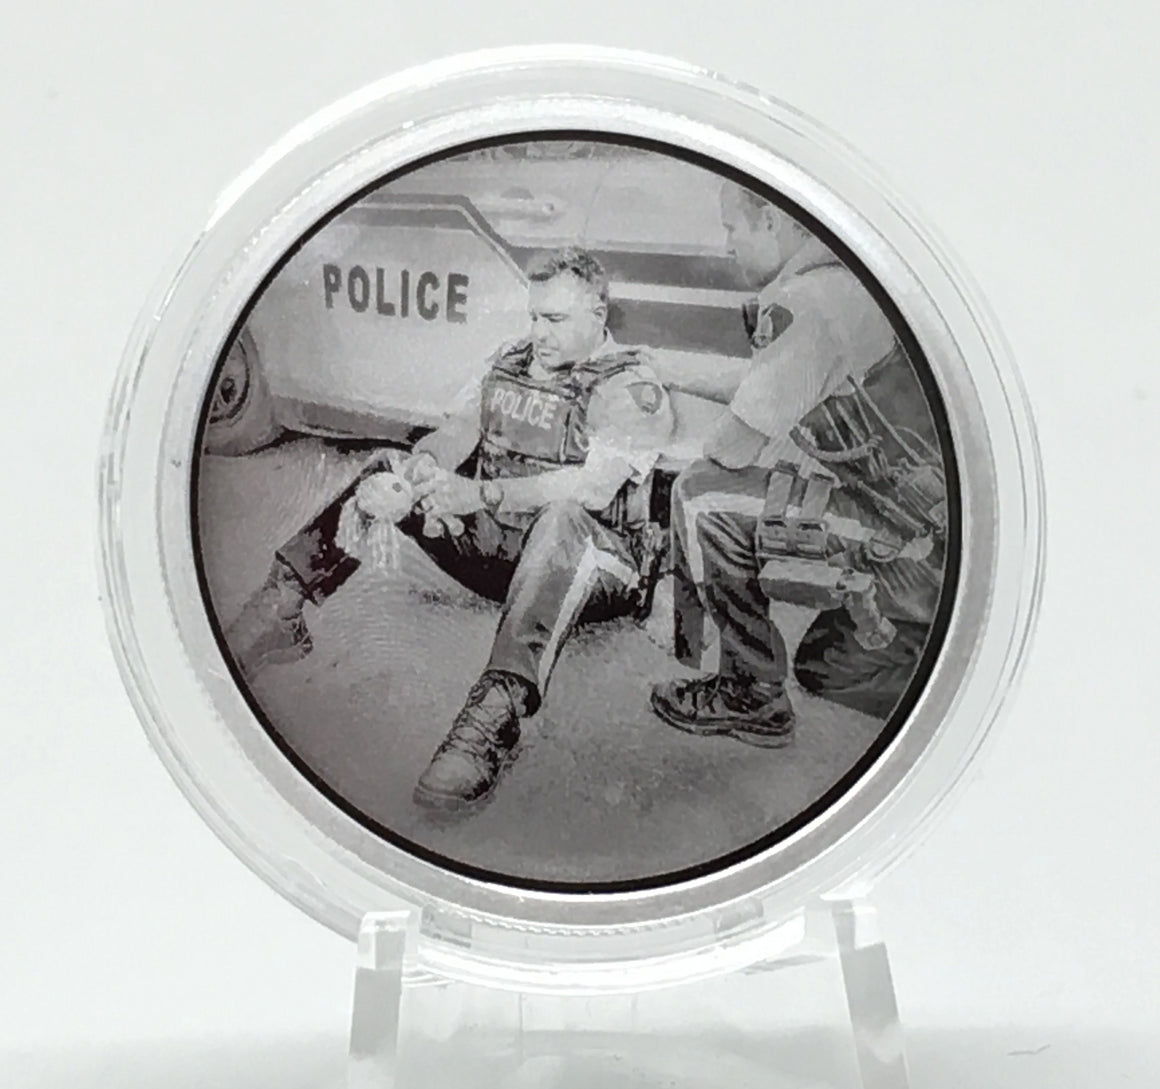 A Girl's Doll - Wounded Healers, 1oz .999 Fine Silver Round by Pheli Mint